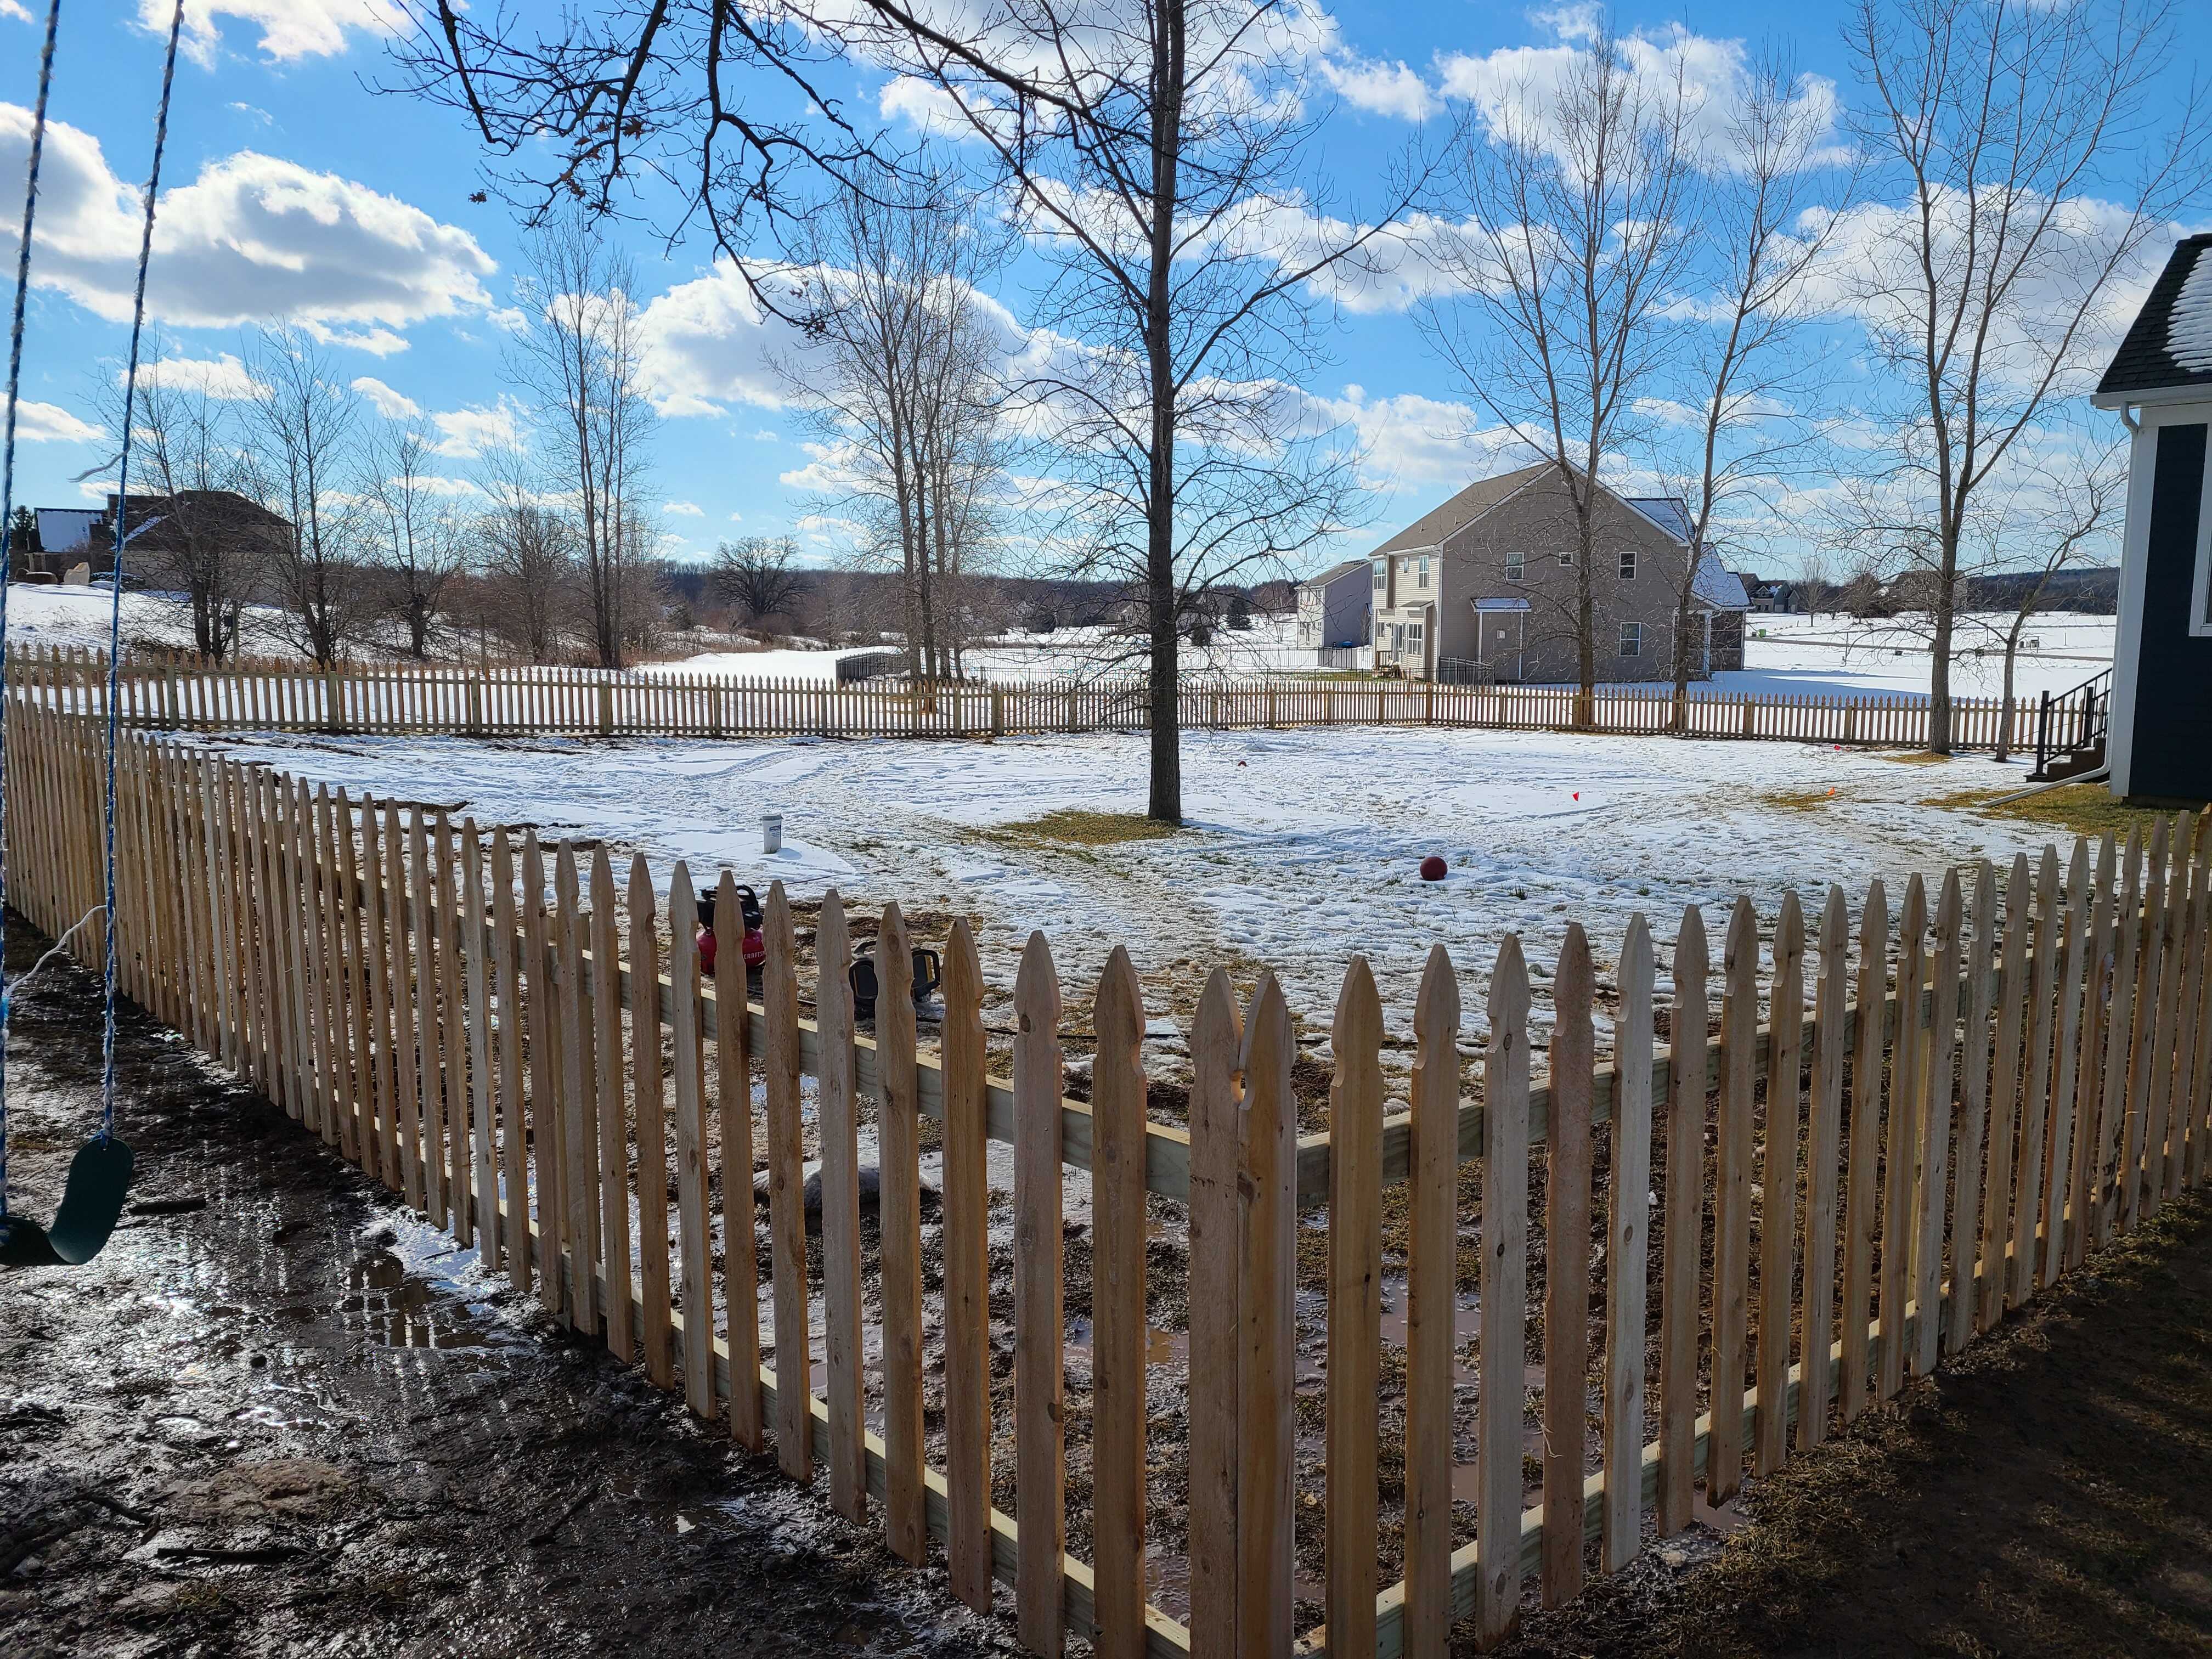 A picket style fence.